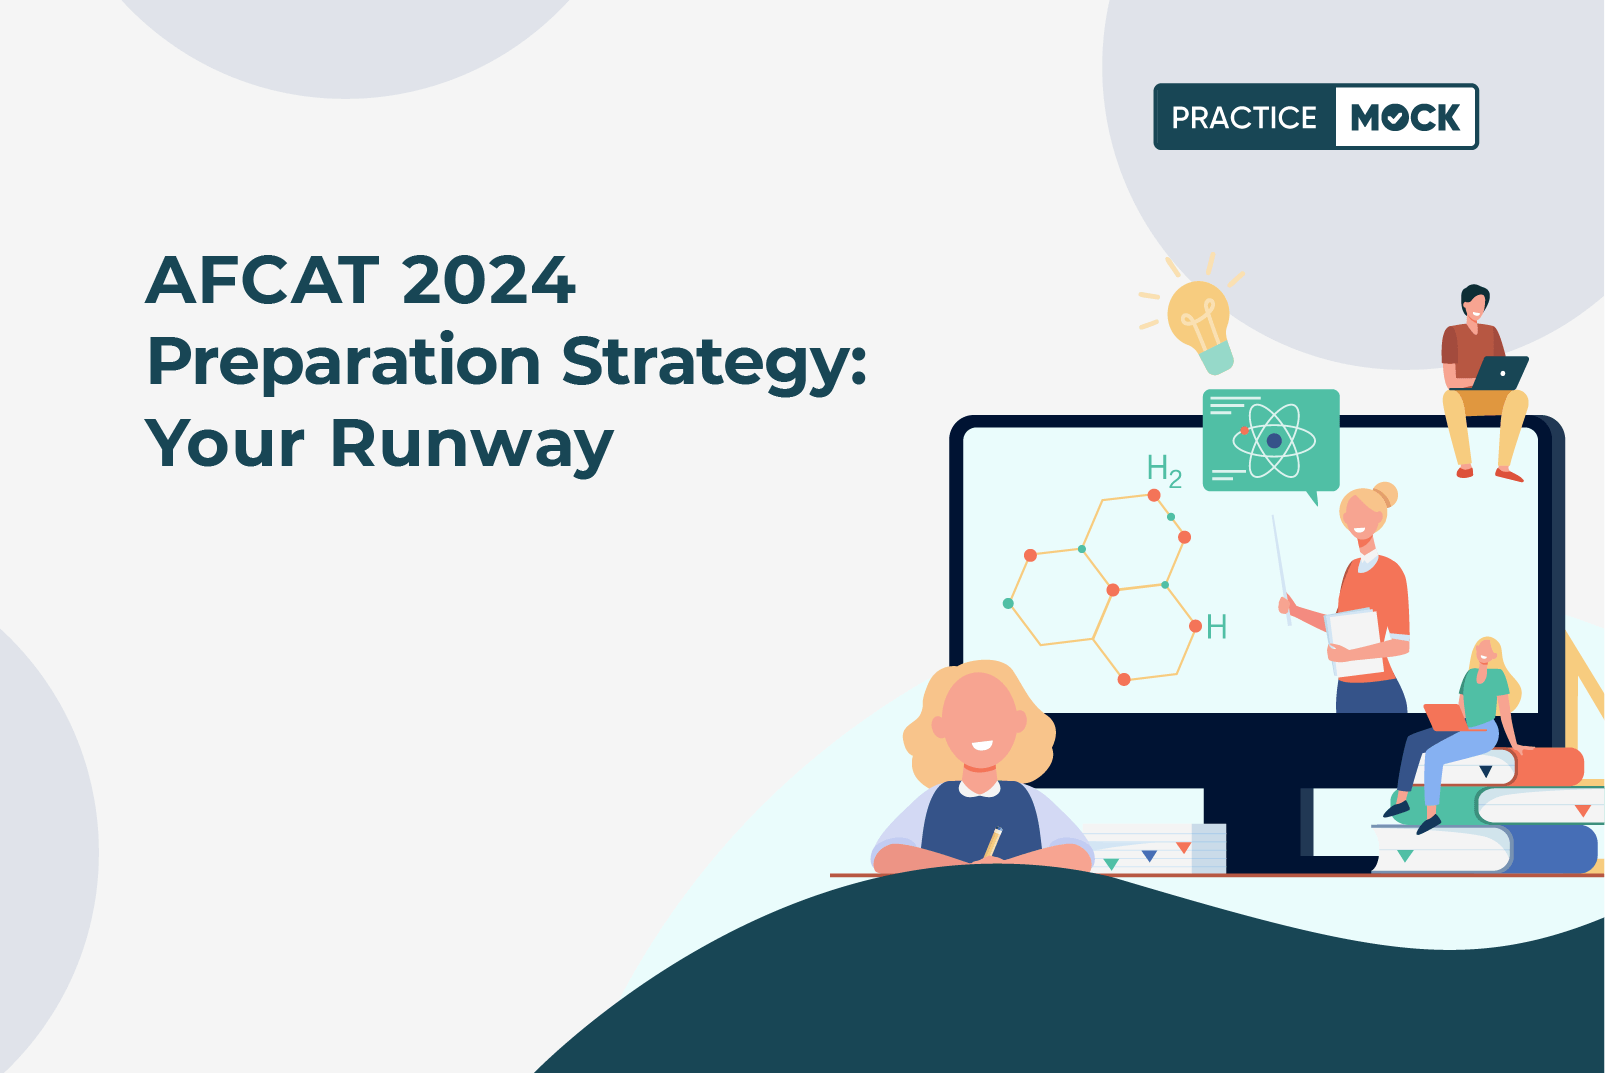 AFCAT 2024 Preparation Strategy: Your Runway